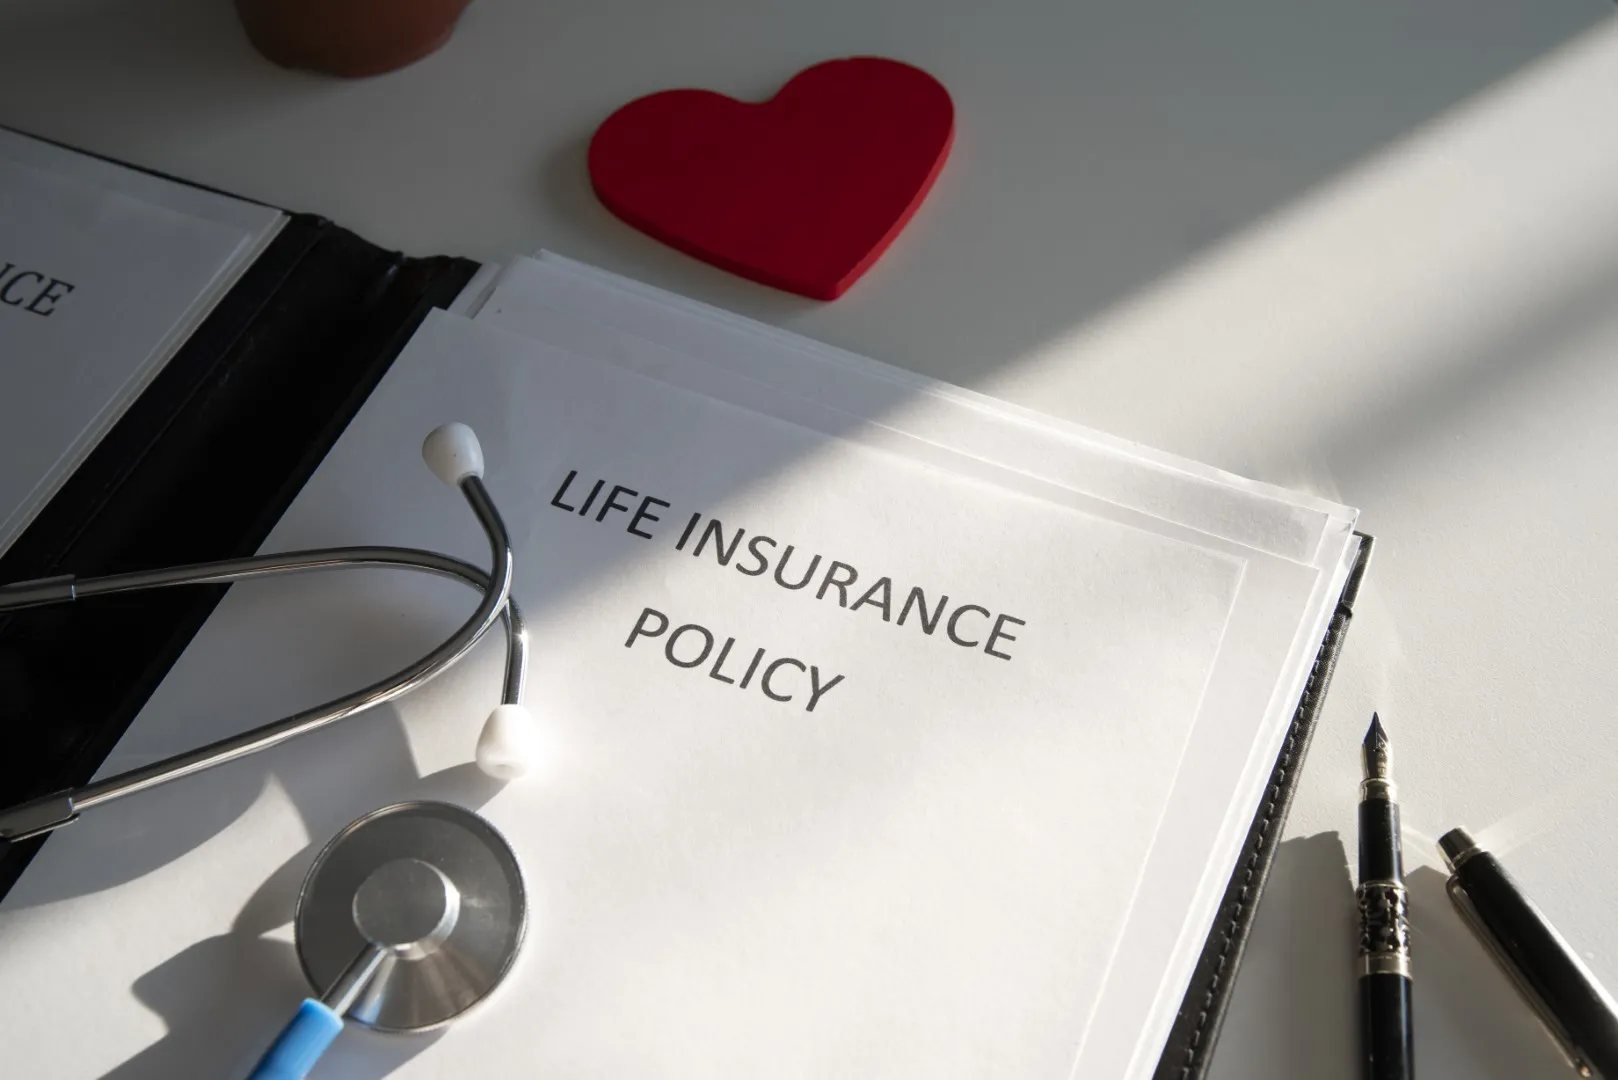 high Best Life Insurance Policy For You in united states w